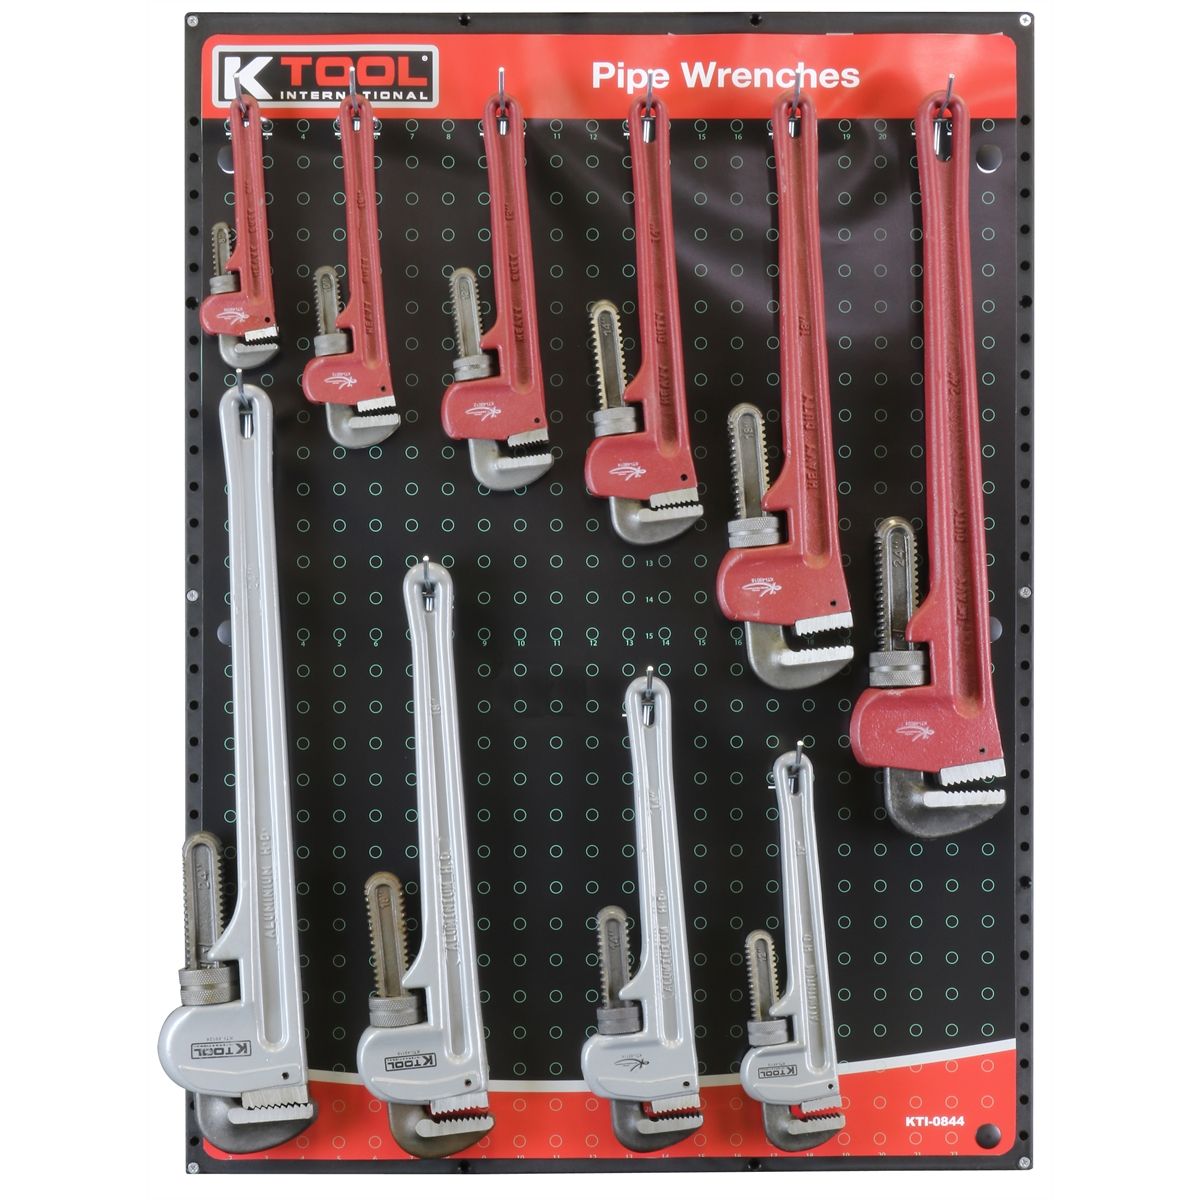 Pipe Wrench Display